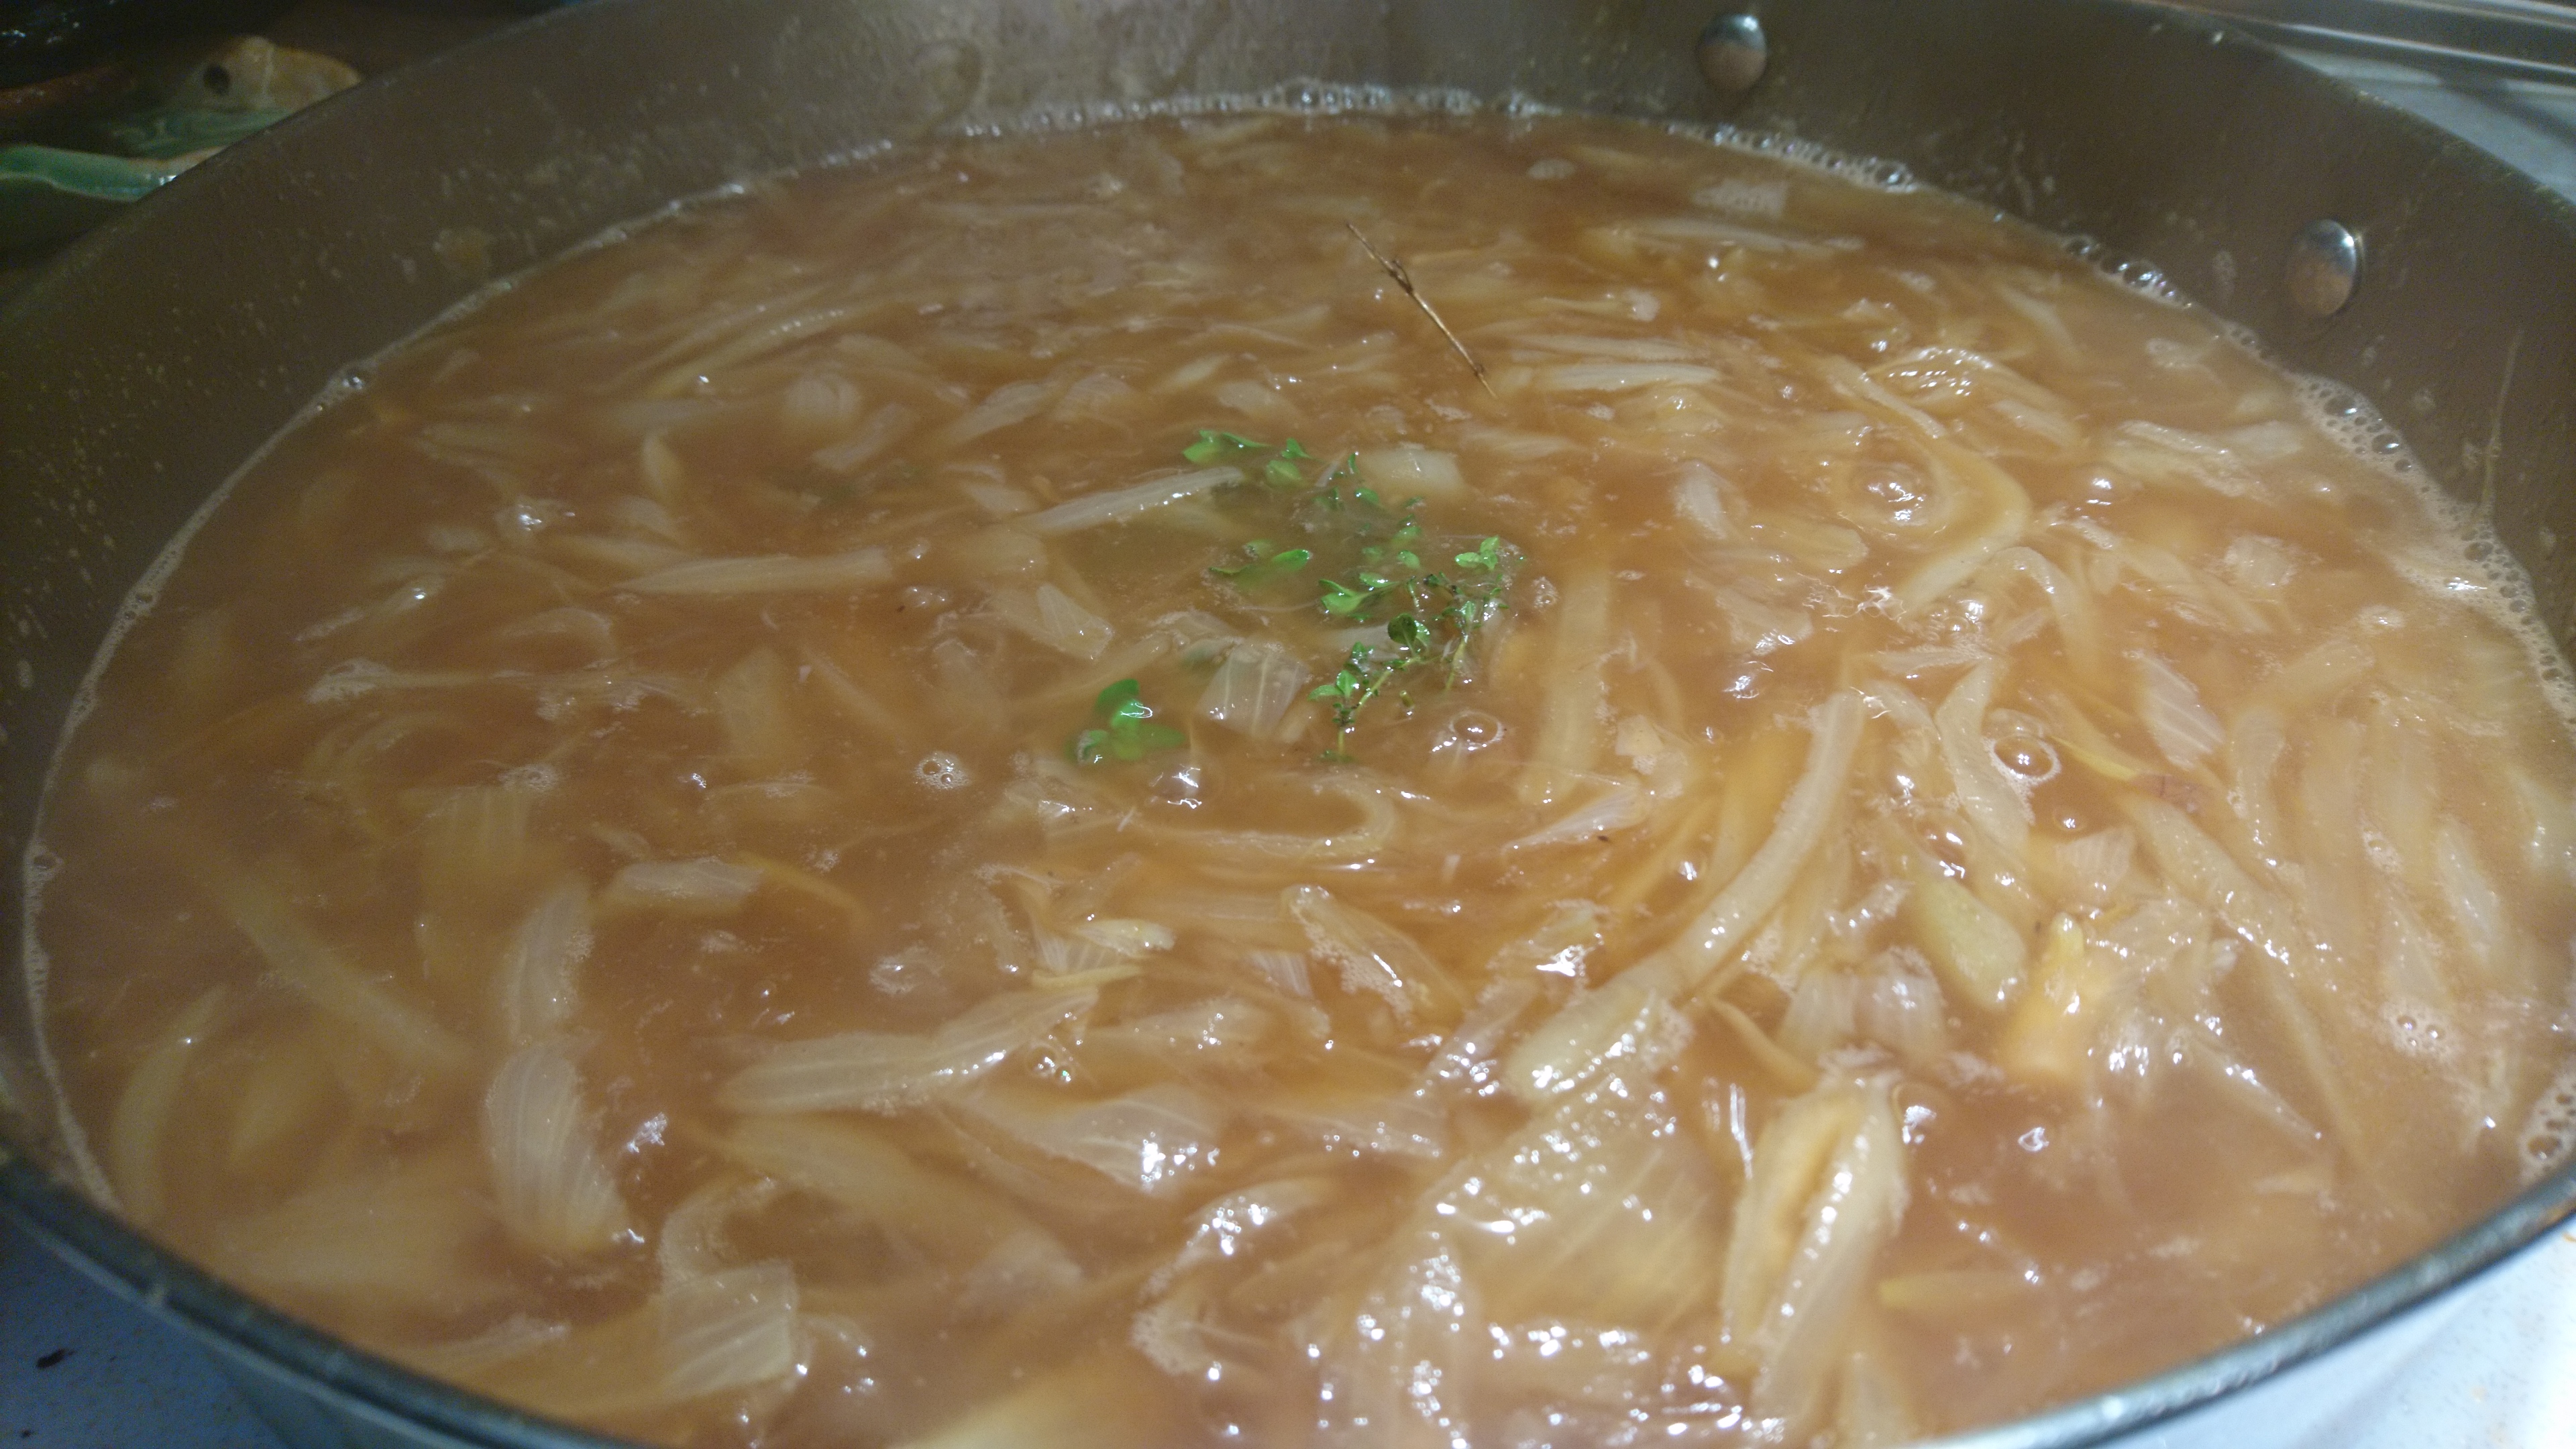 onions and soup mixed in the pan